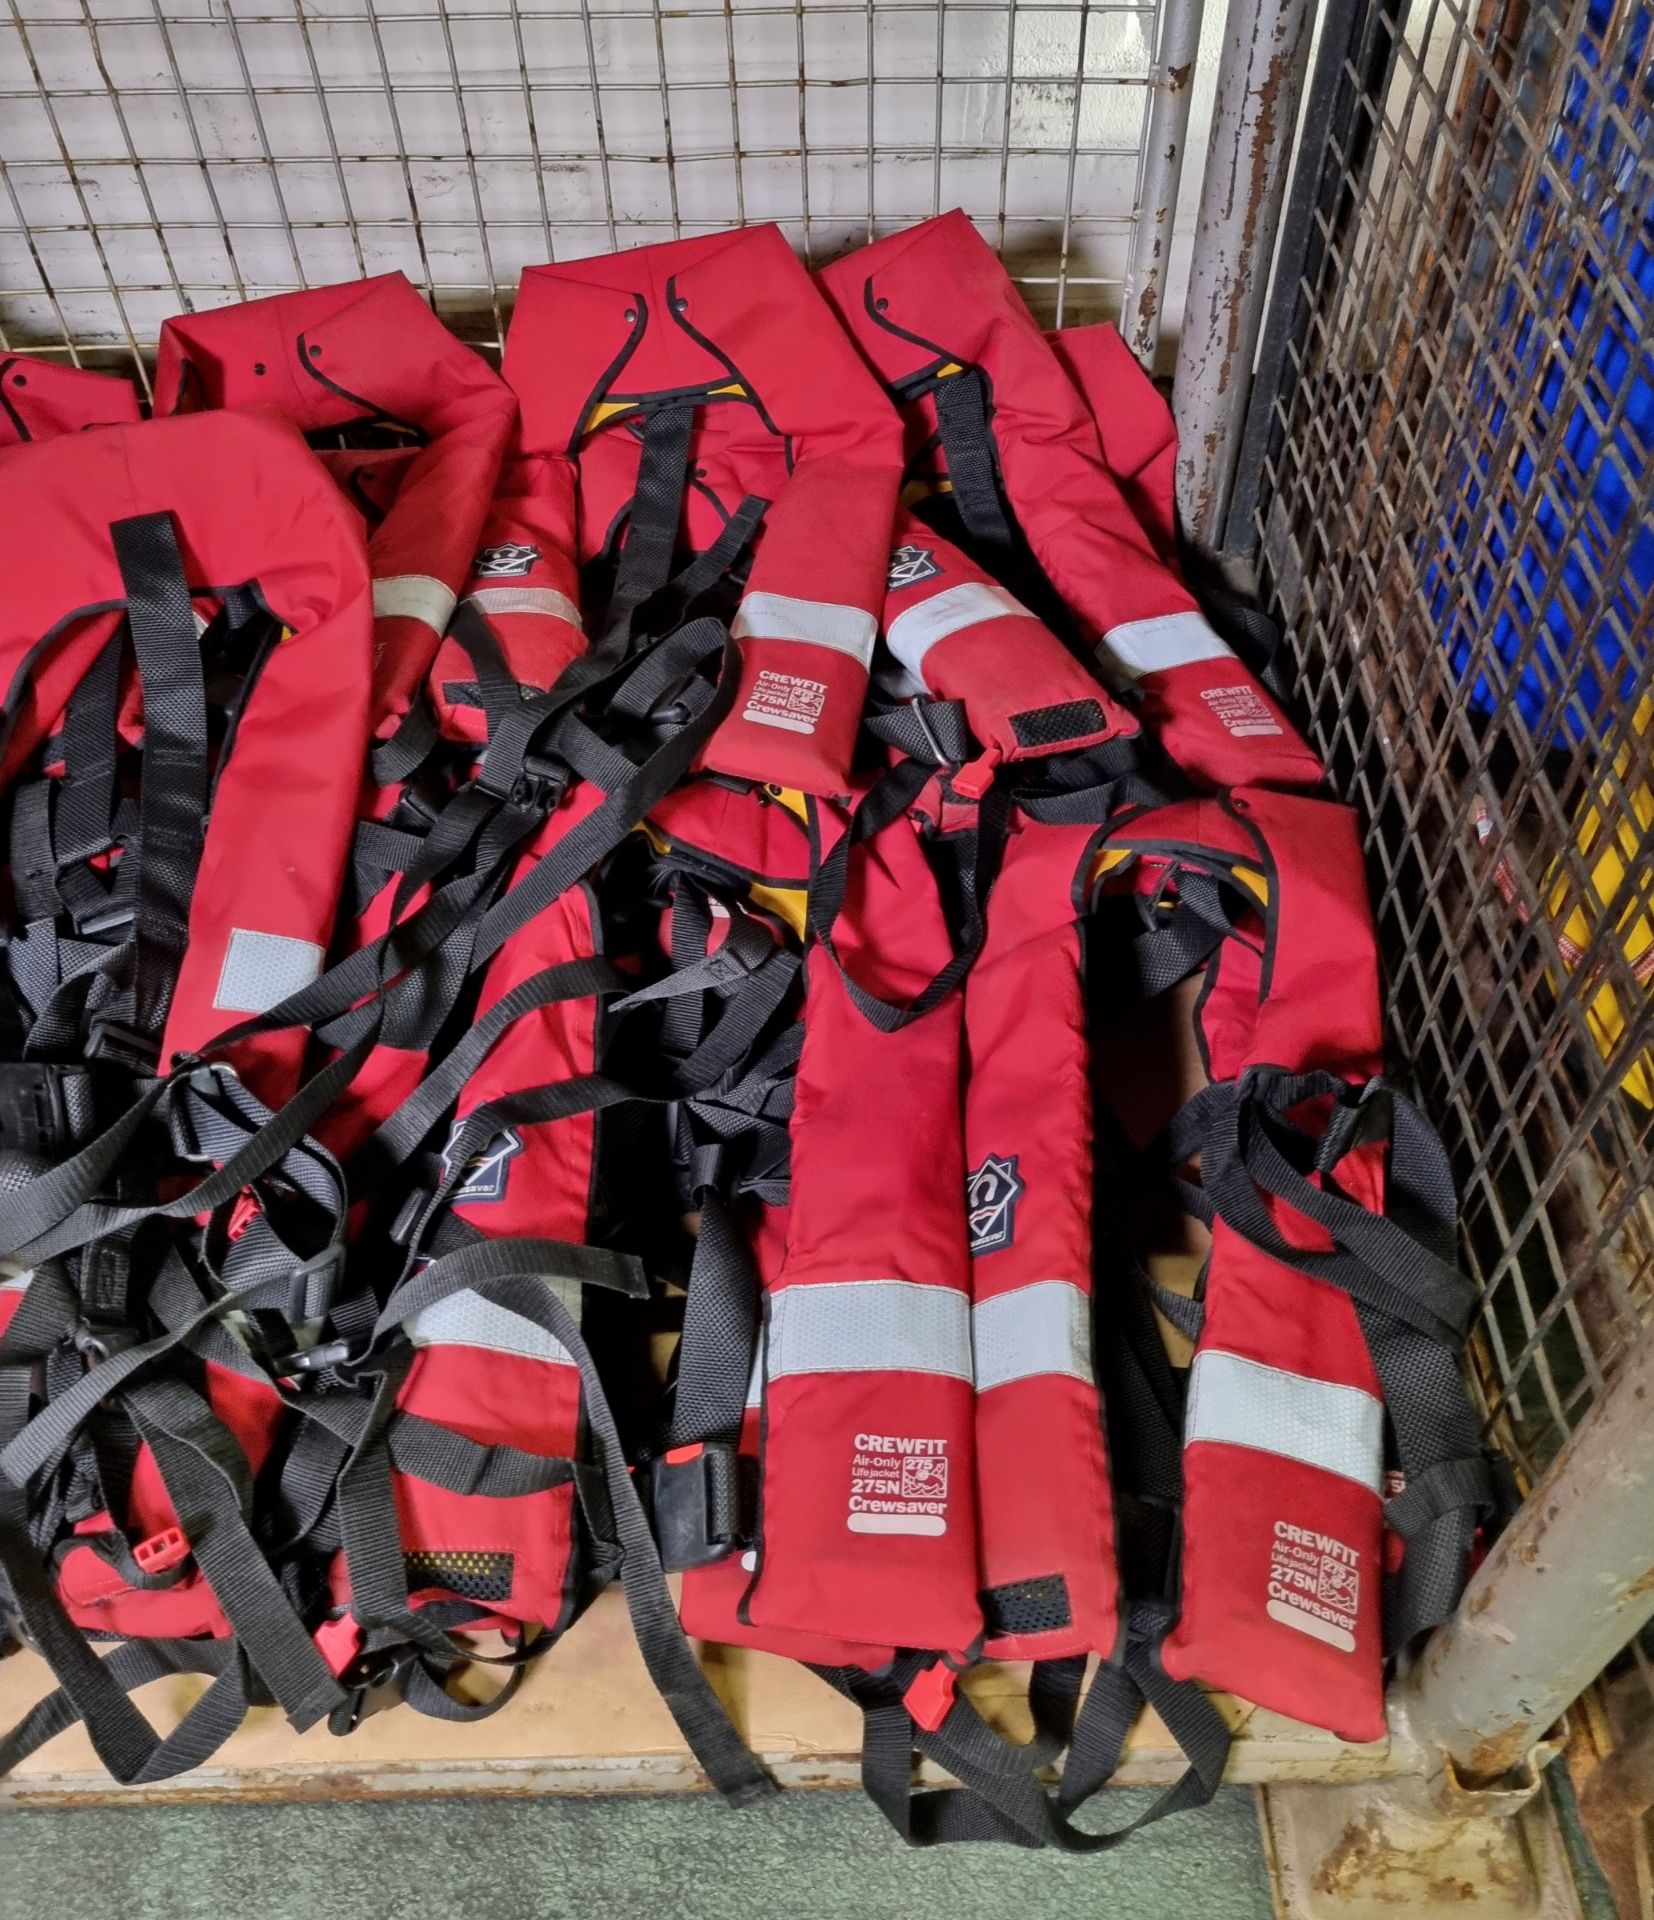 22x Crewfit 275N Crewsaver air-only lifejackets - CO2 CARTRIDGES OUT OF DATE - UNCERTIFIED - Image 3 of 6